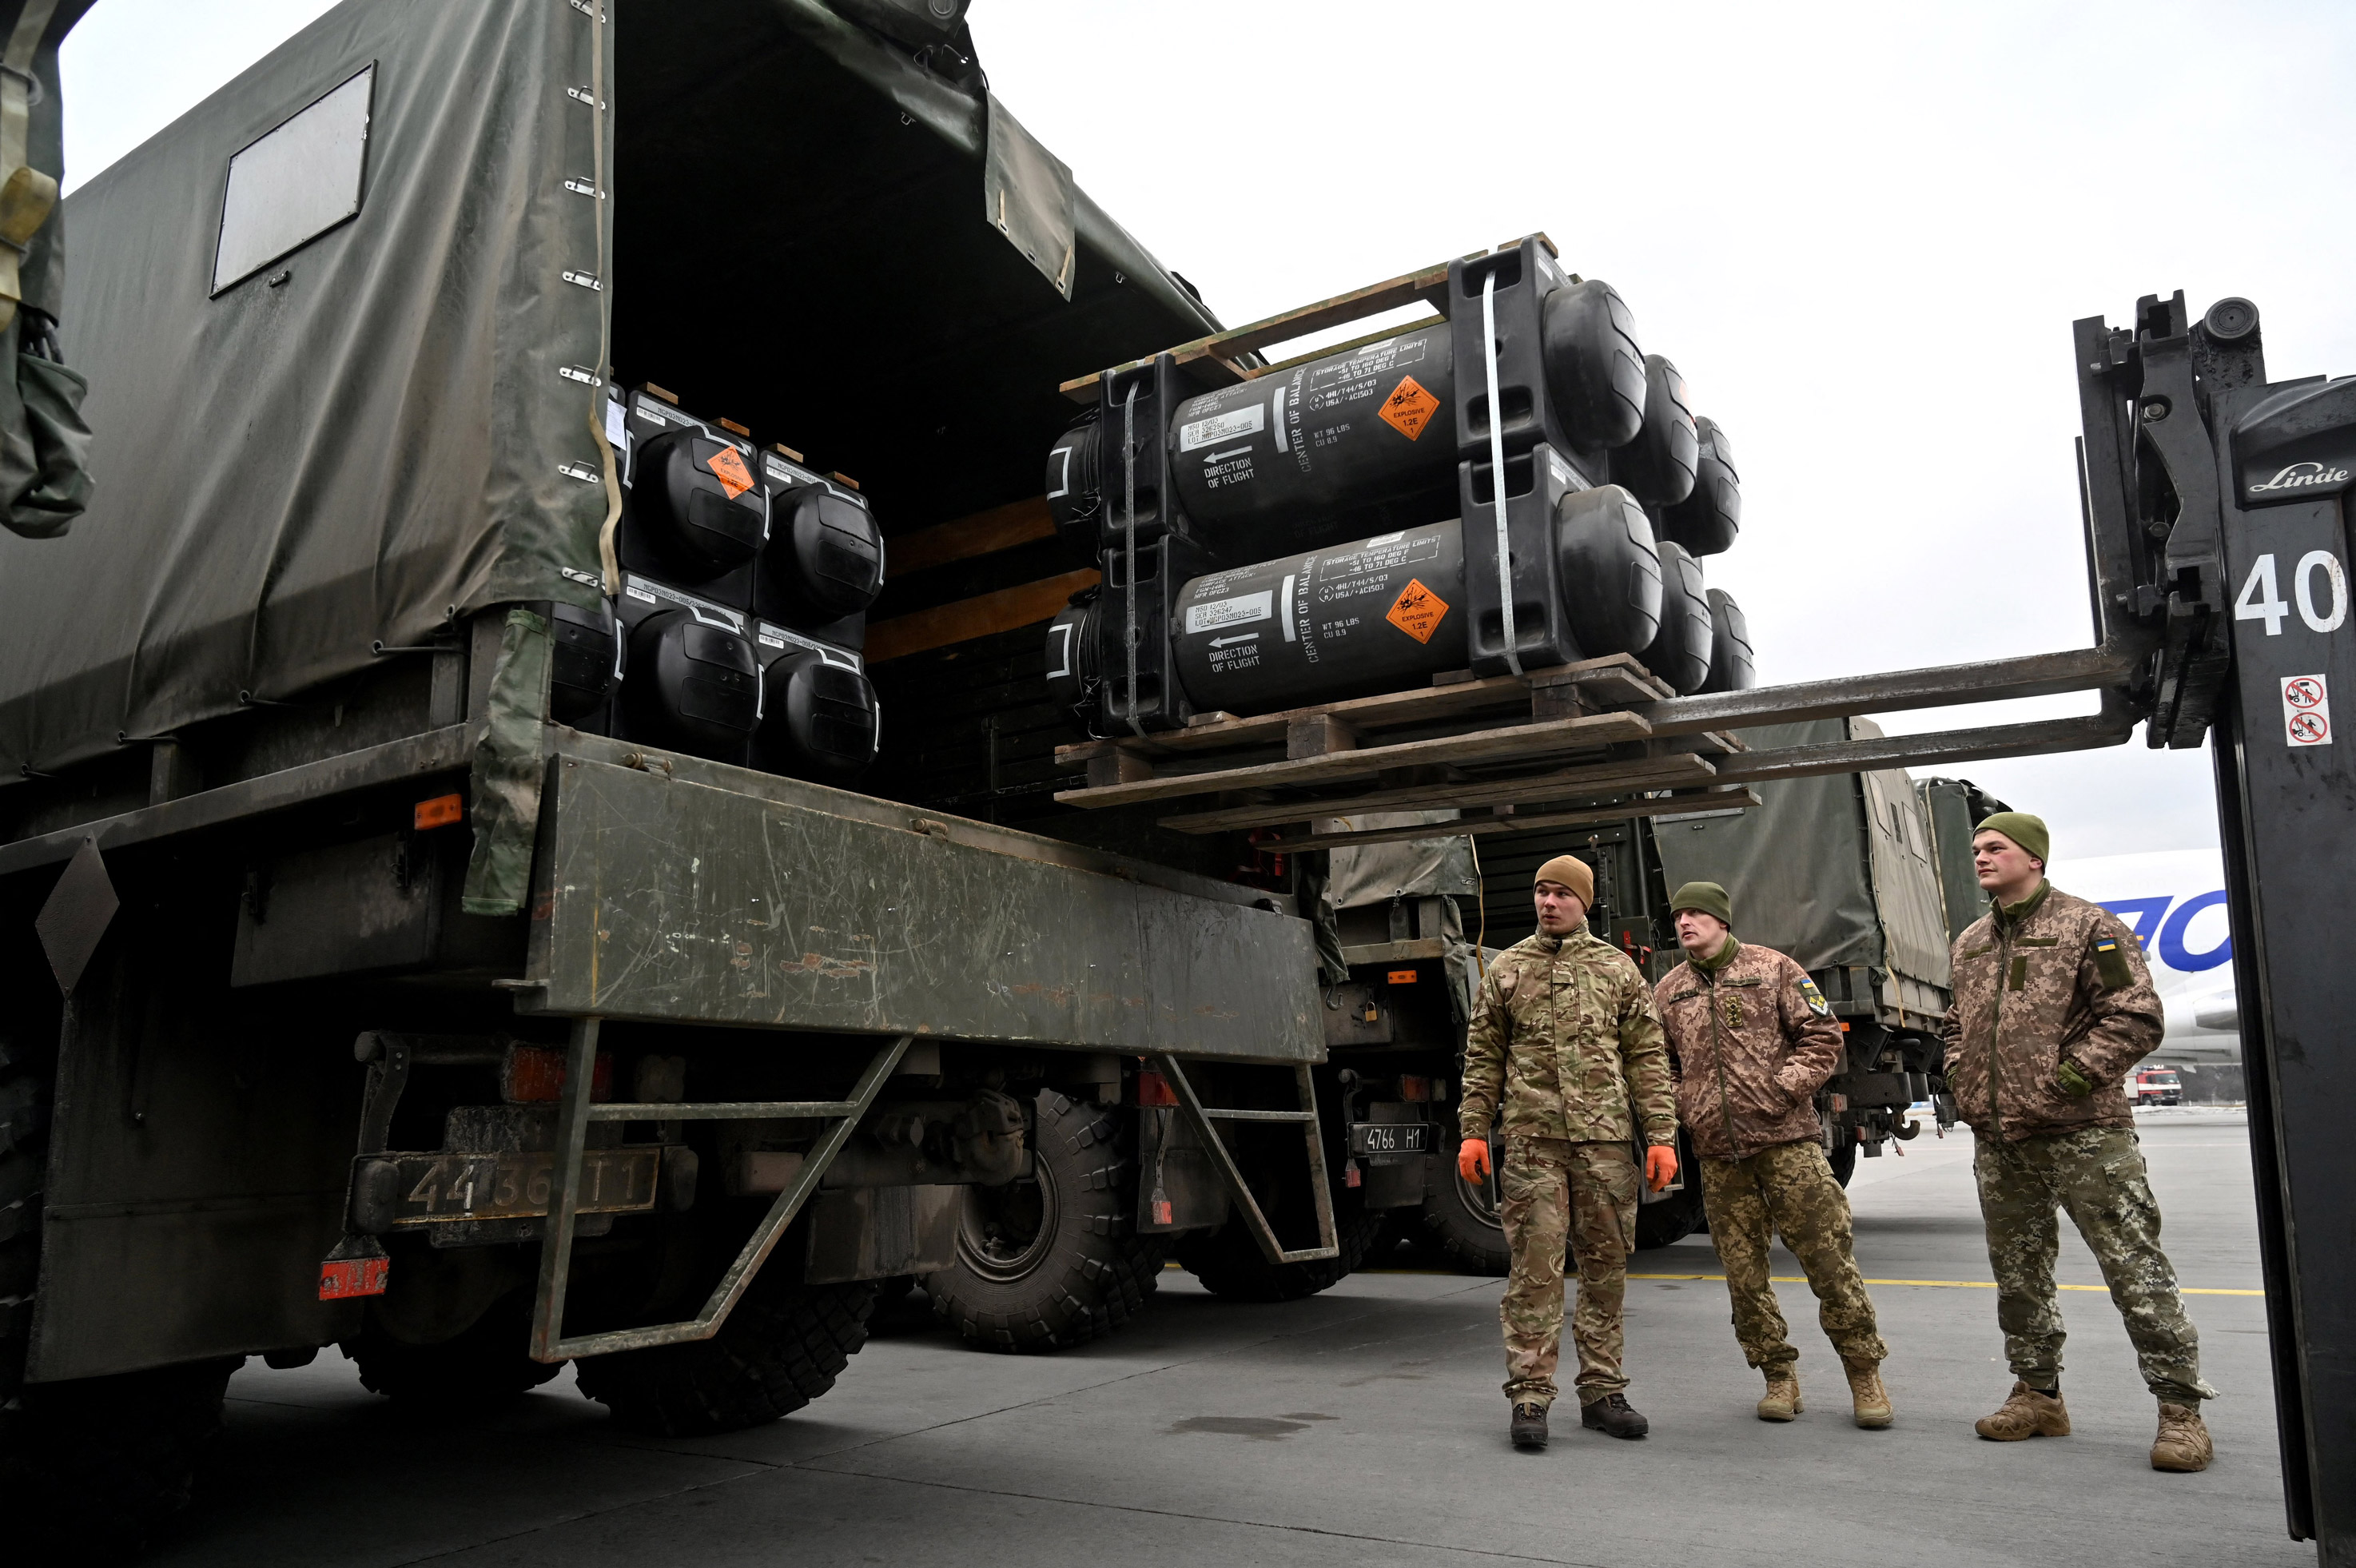 Ukrainian servicemen load a truck with American FGM-148 Javelins as they arrive at the Boryspil airport in Kyiv, on February 11.